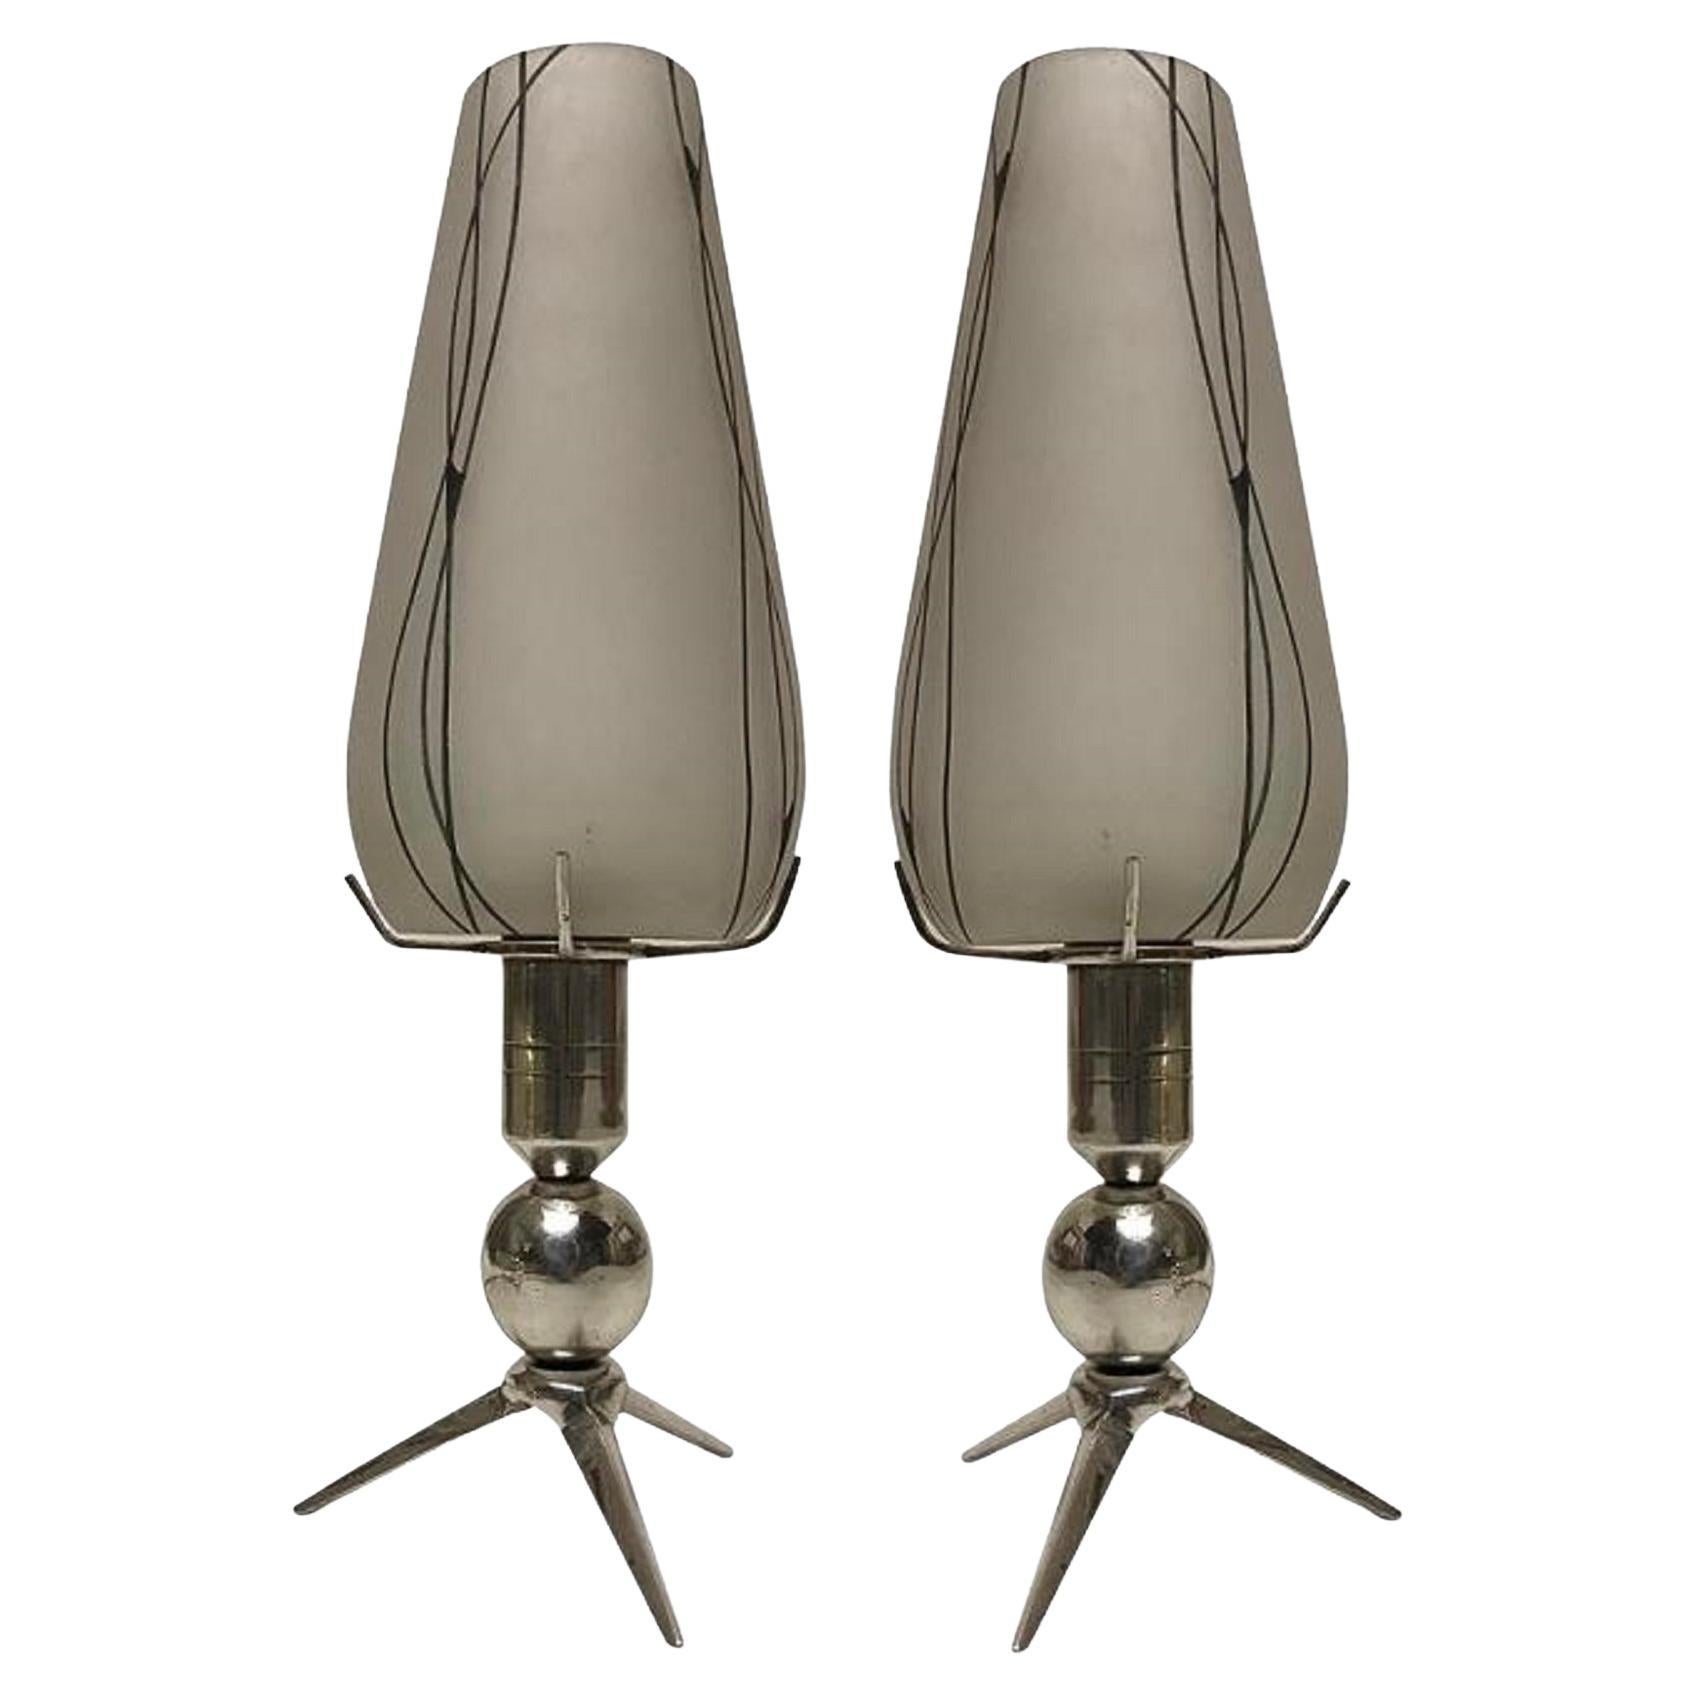 2 Table Lamps, Glass and Plated Bronze, Style: Art Deco, Italy , 1930